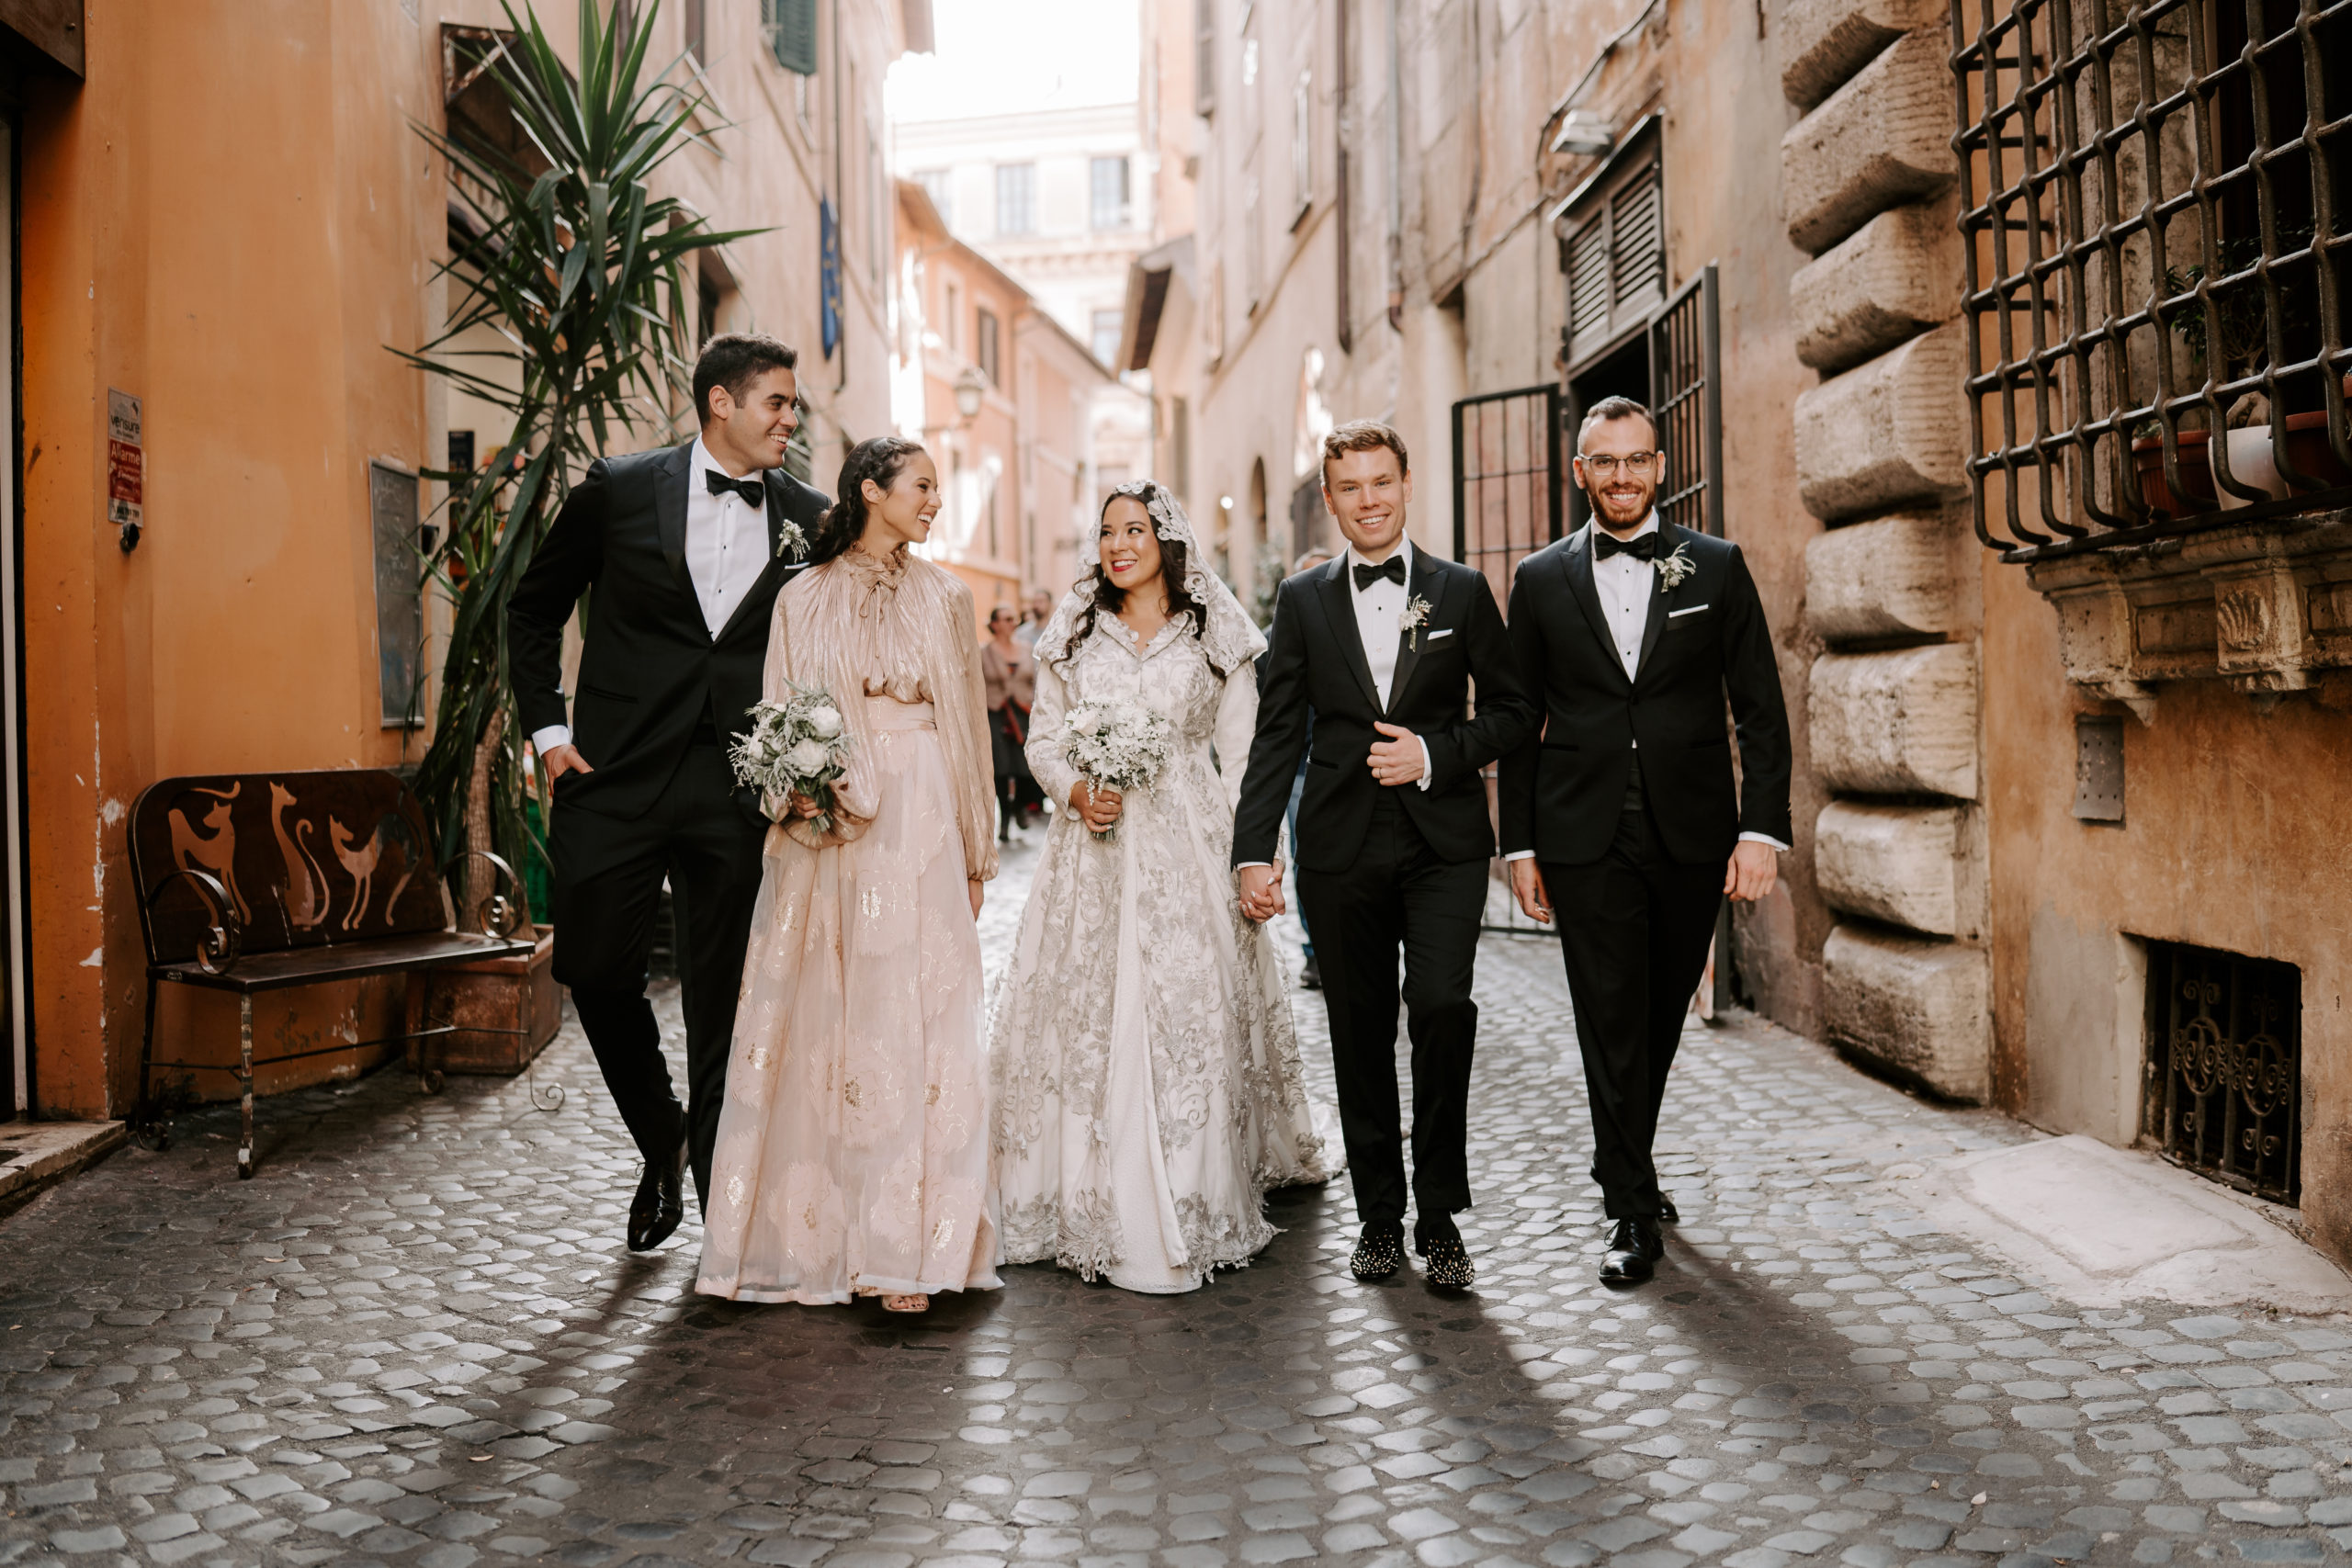 Bridesmaid Style Inspiration for Your Wedding